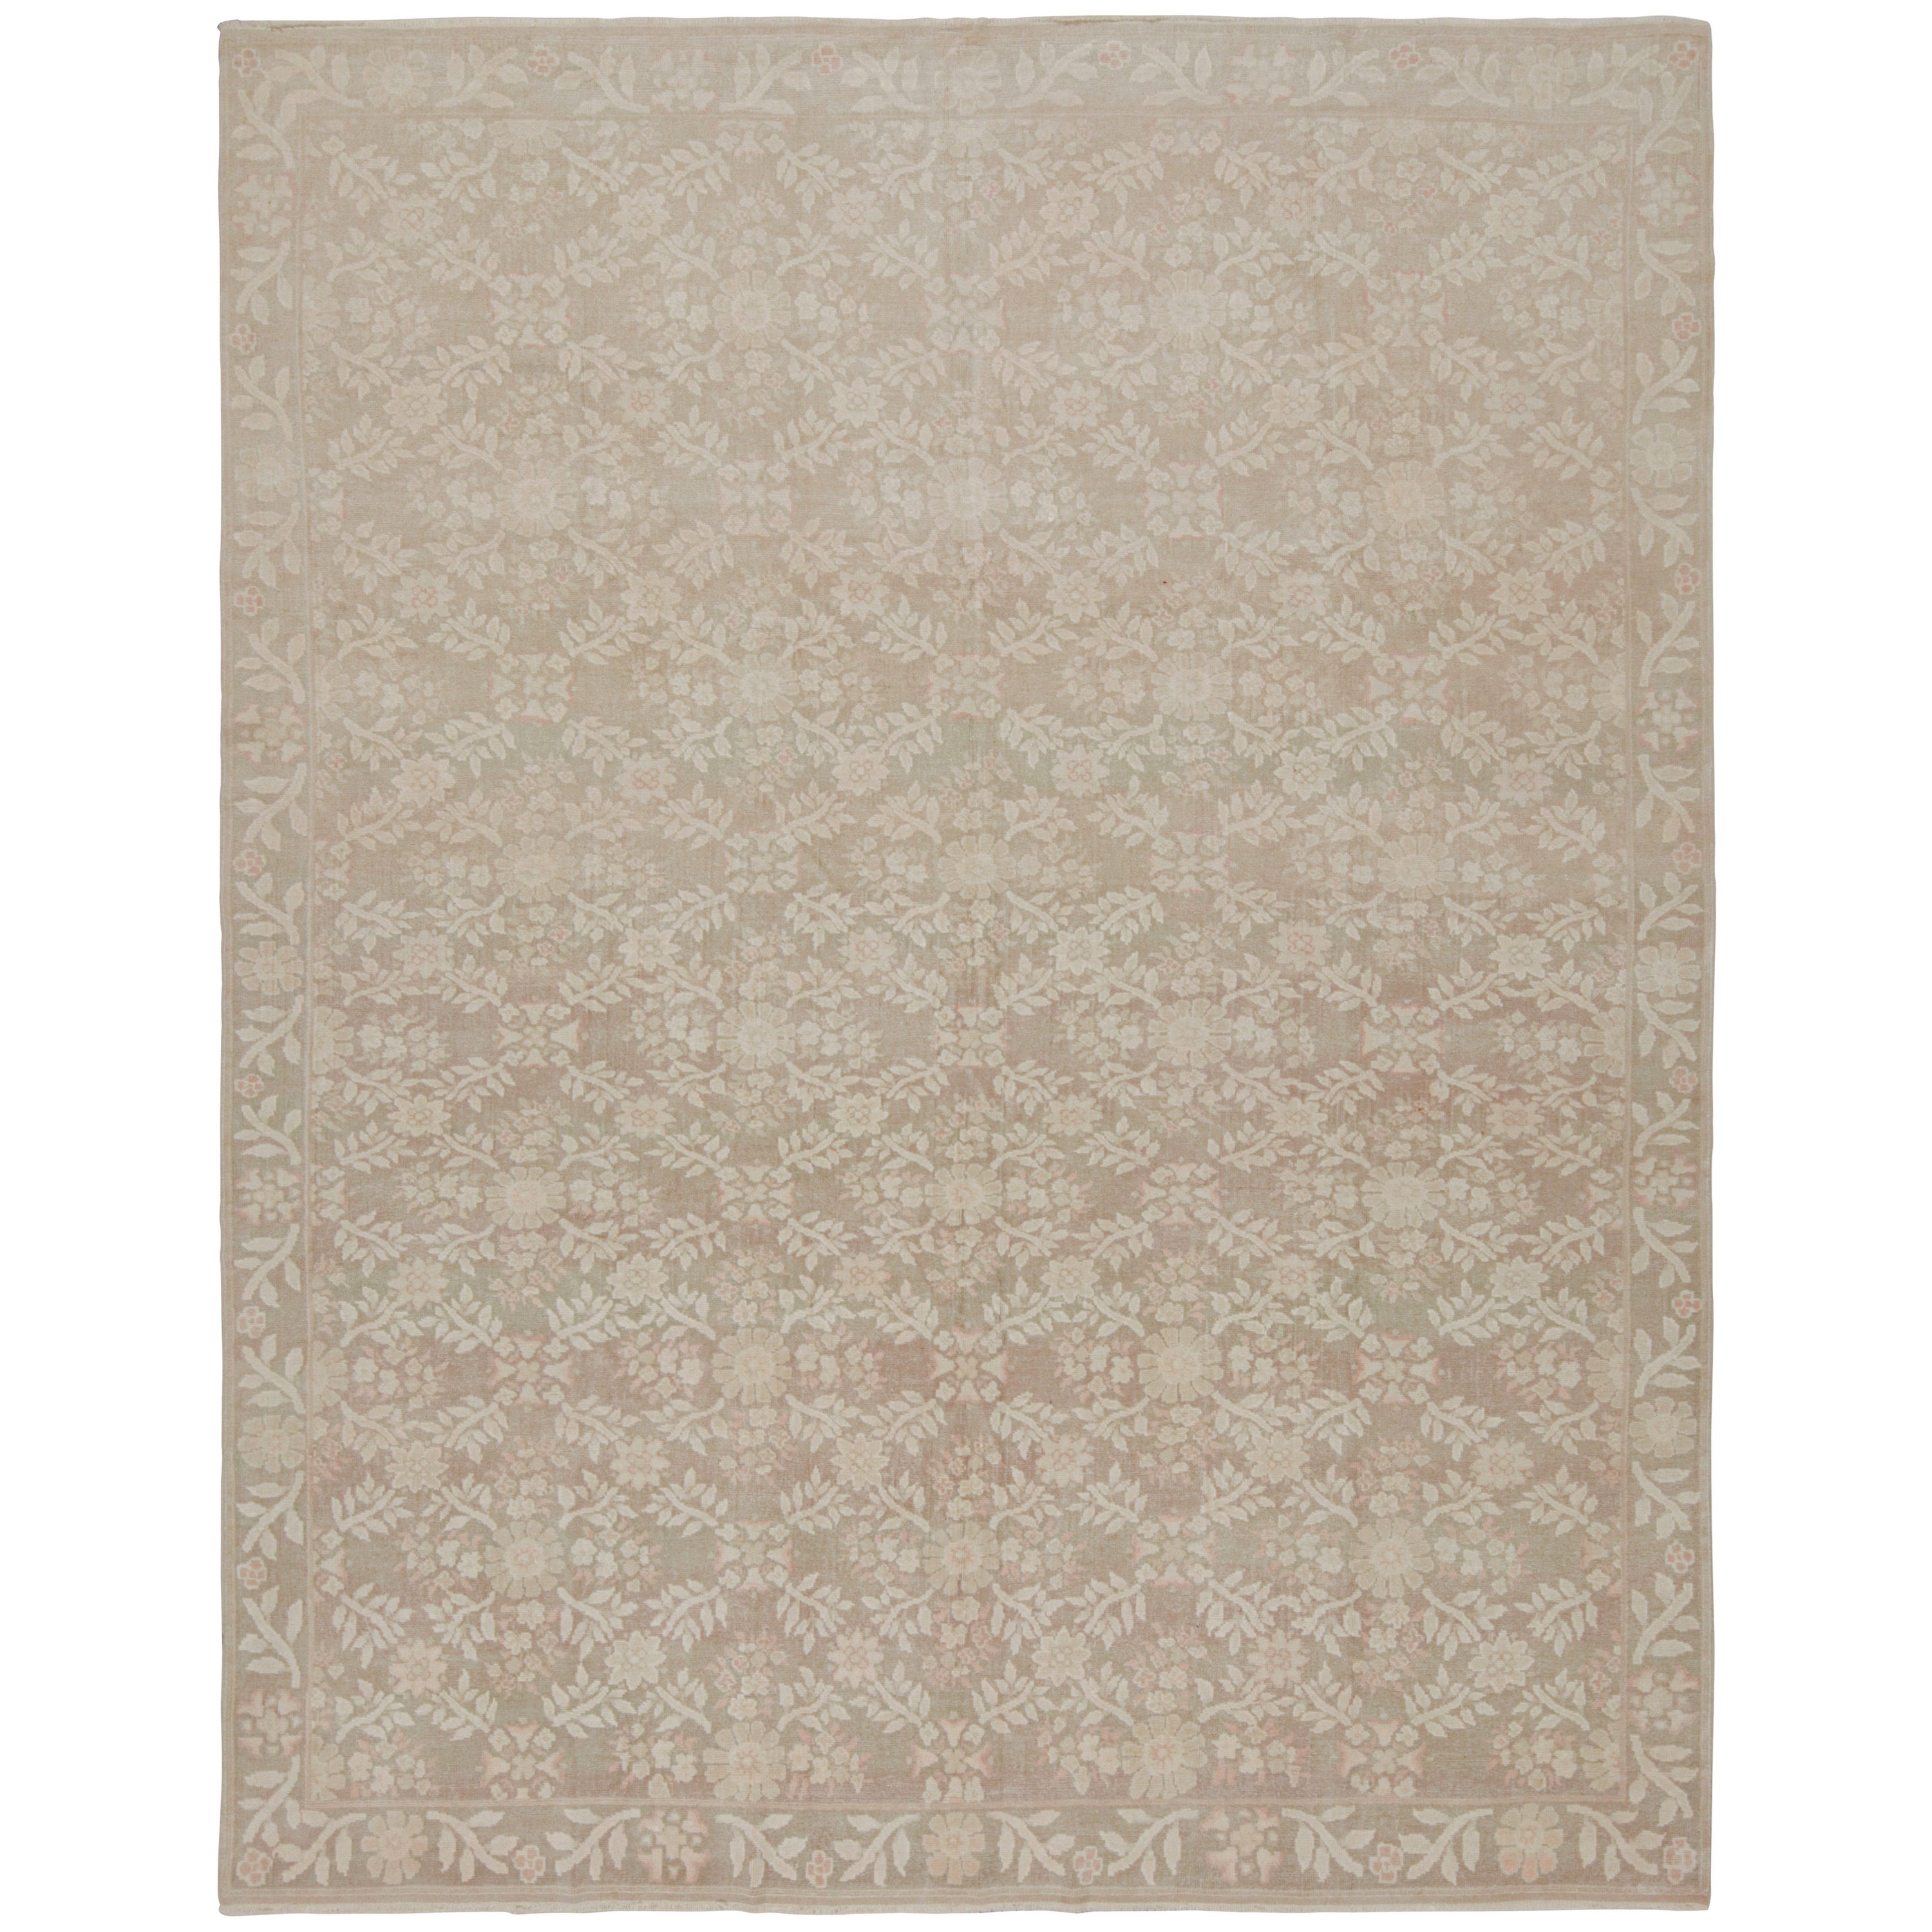 Rug & Kilim’s Contemporary European Style Rug in Beige with Floral Patterns  For Sale